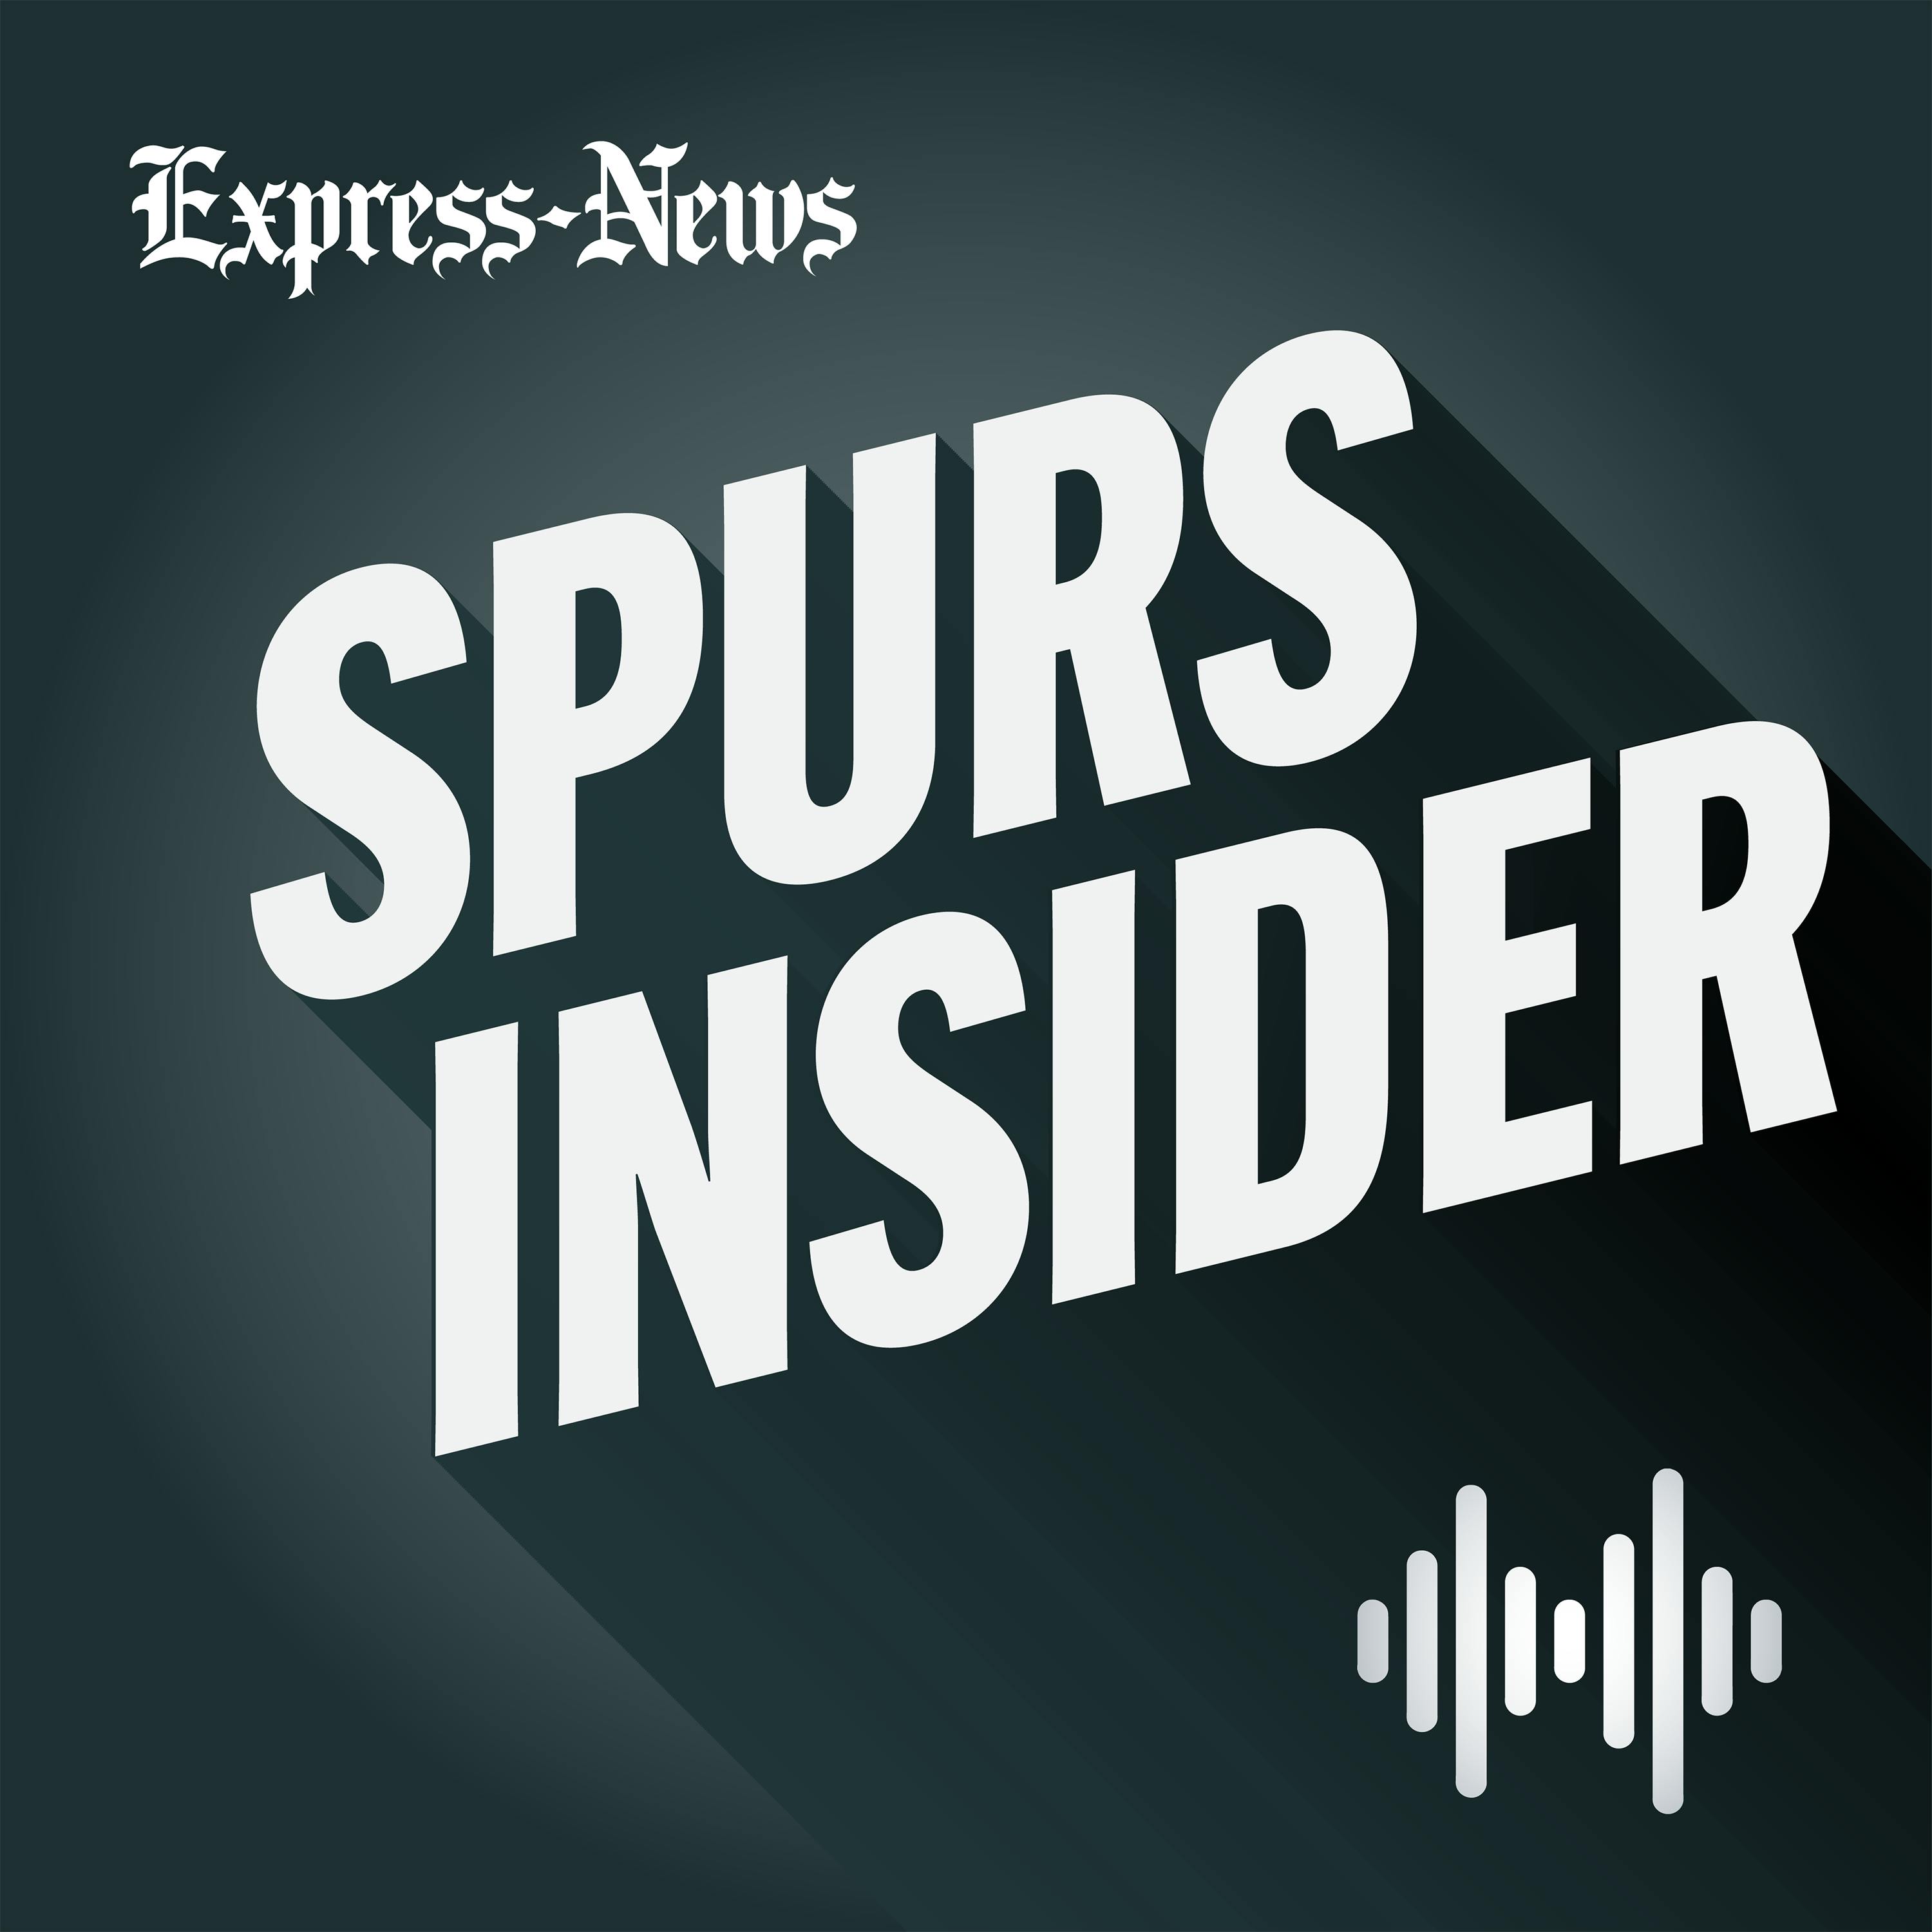 Episode 104: Should the Spurs have been fined $25,000?